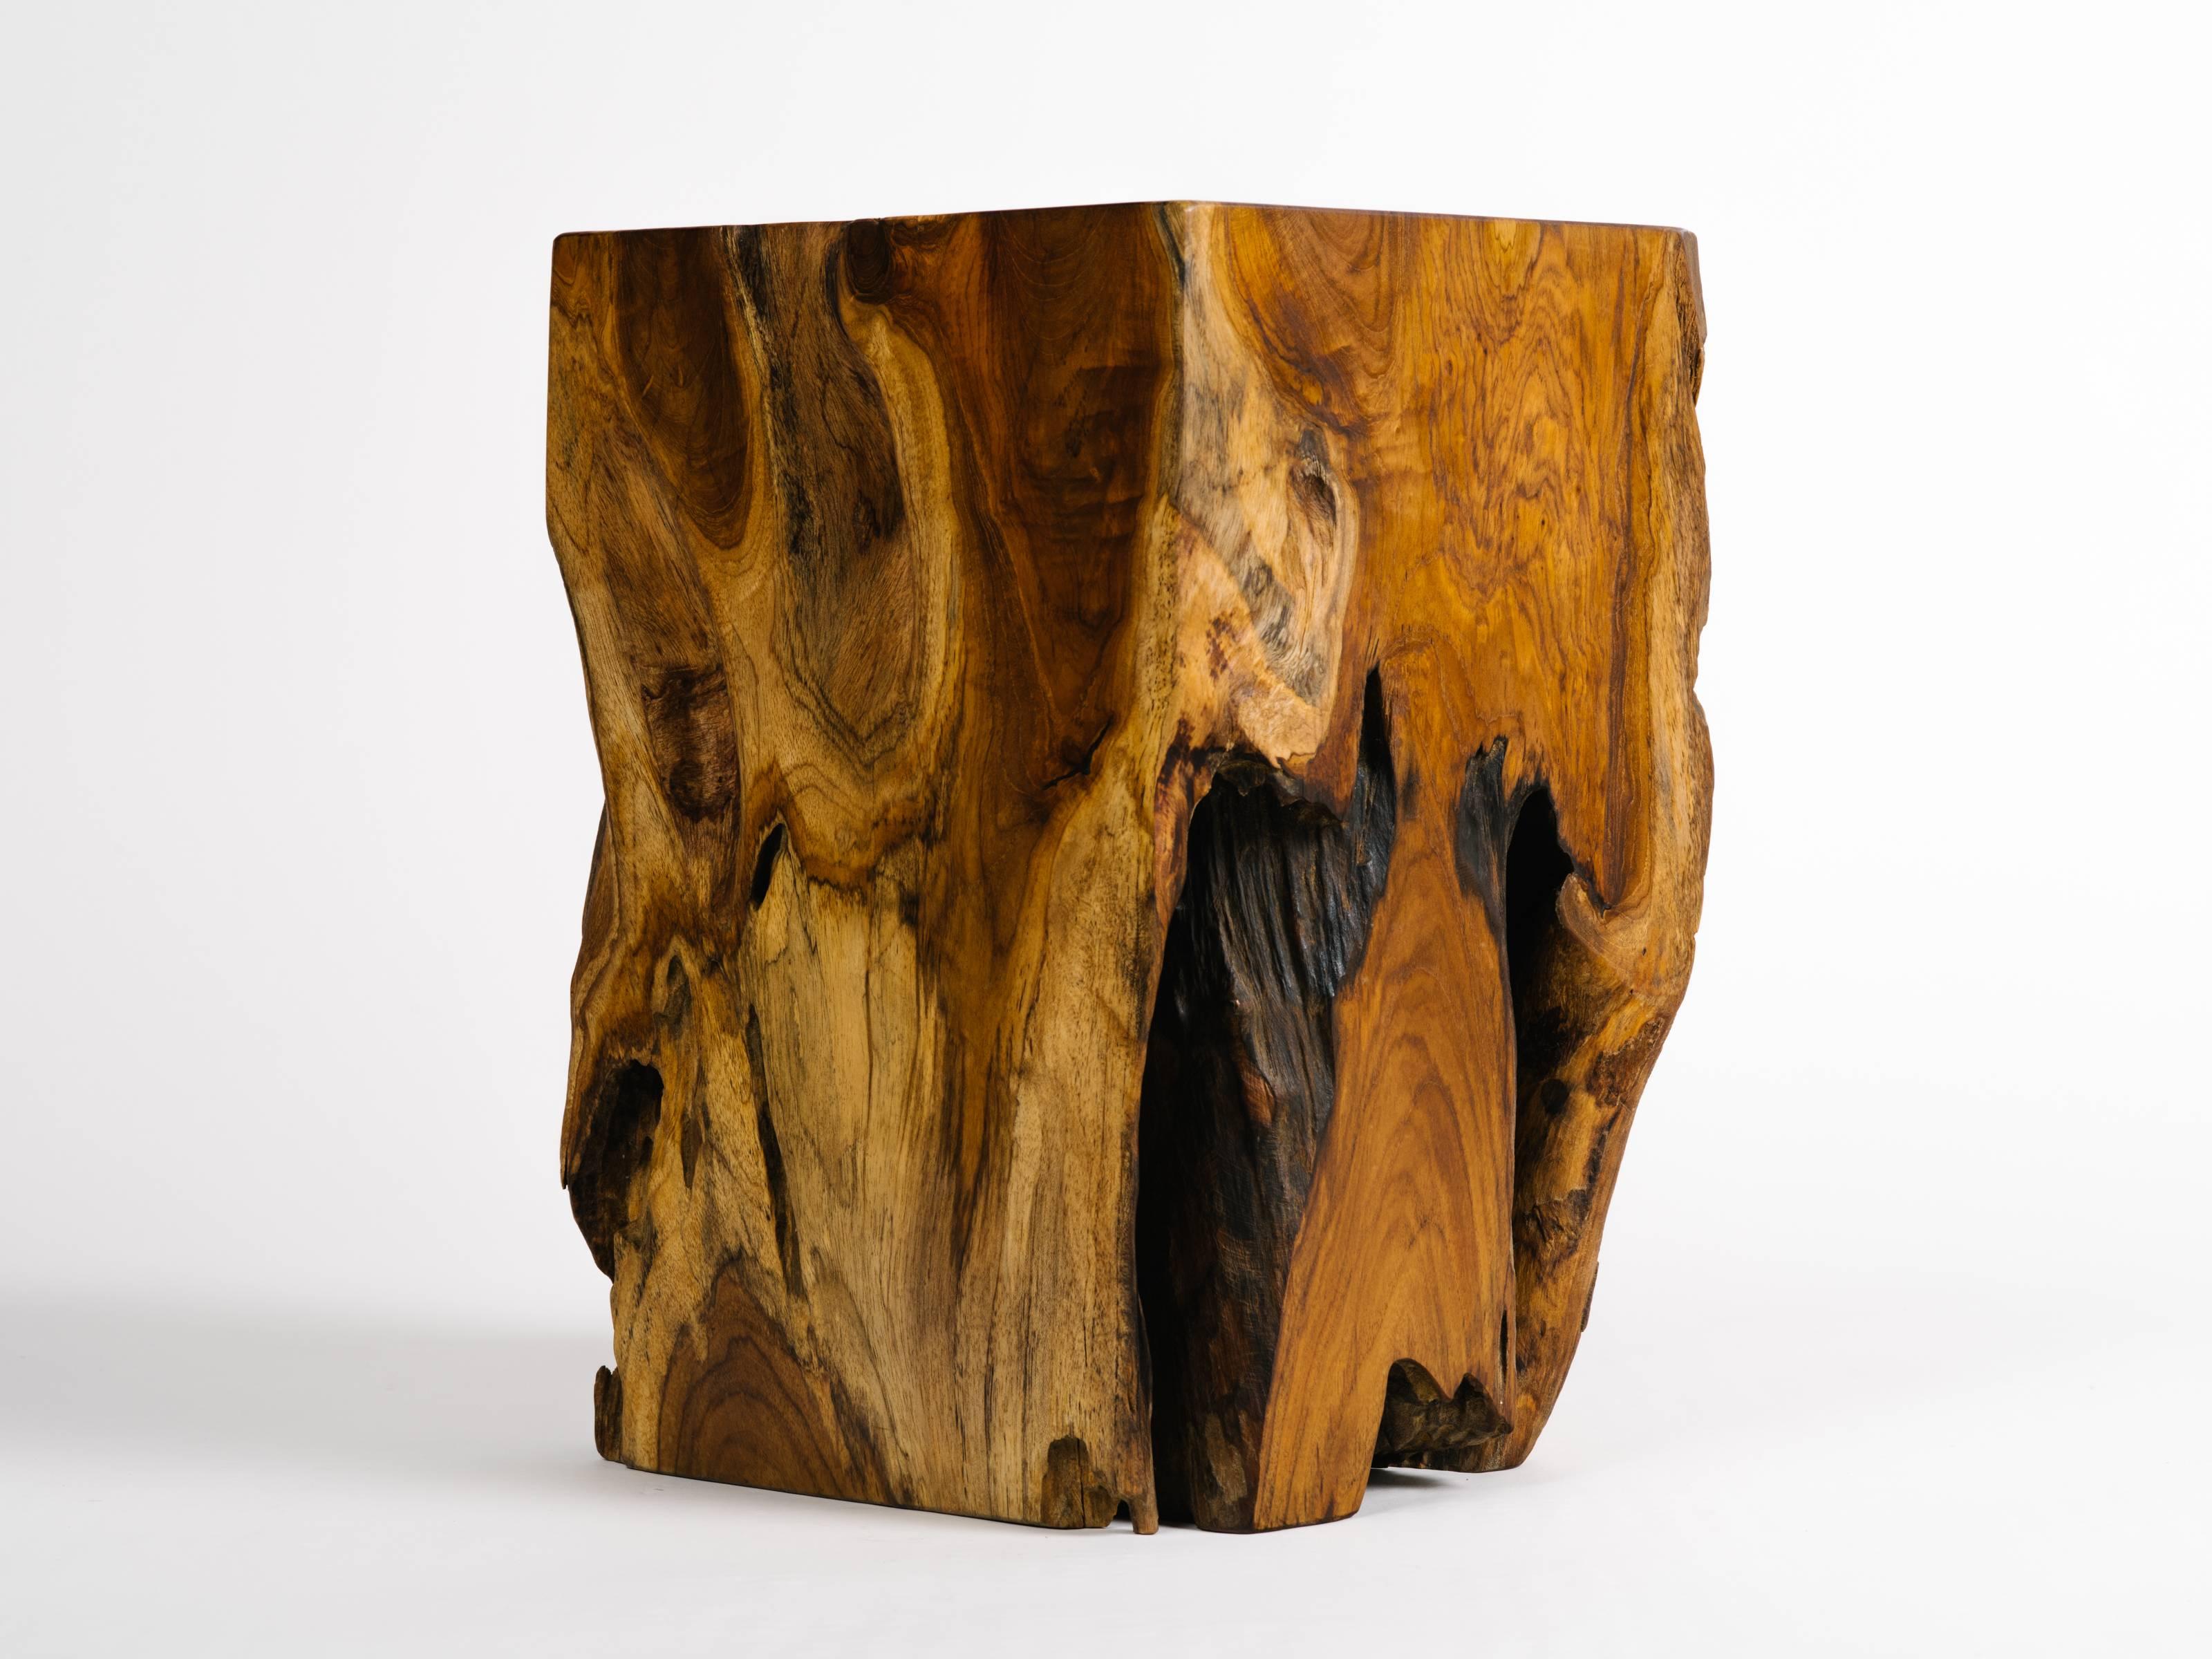 Contemporary Organic Modern Indonesian Teak Wood Side Table or Stool 